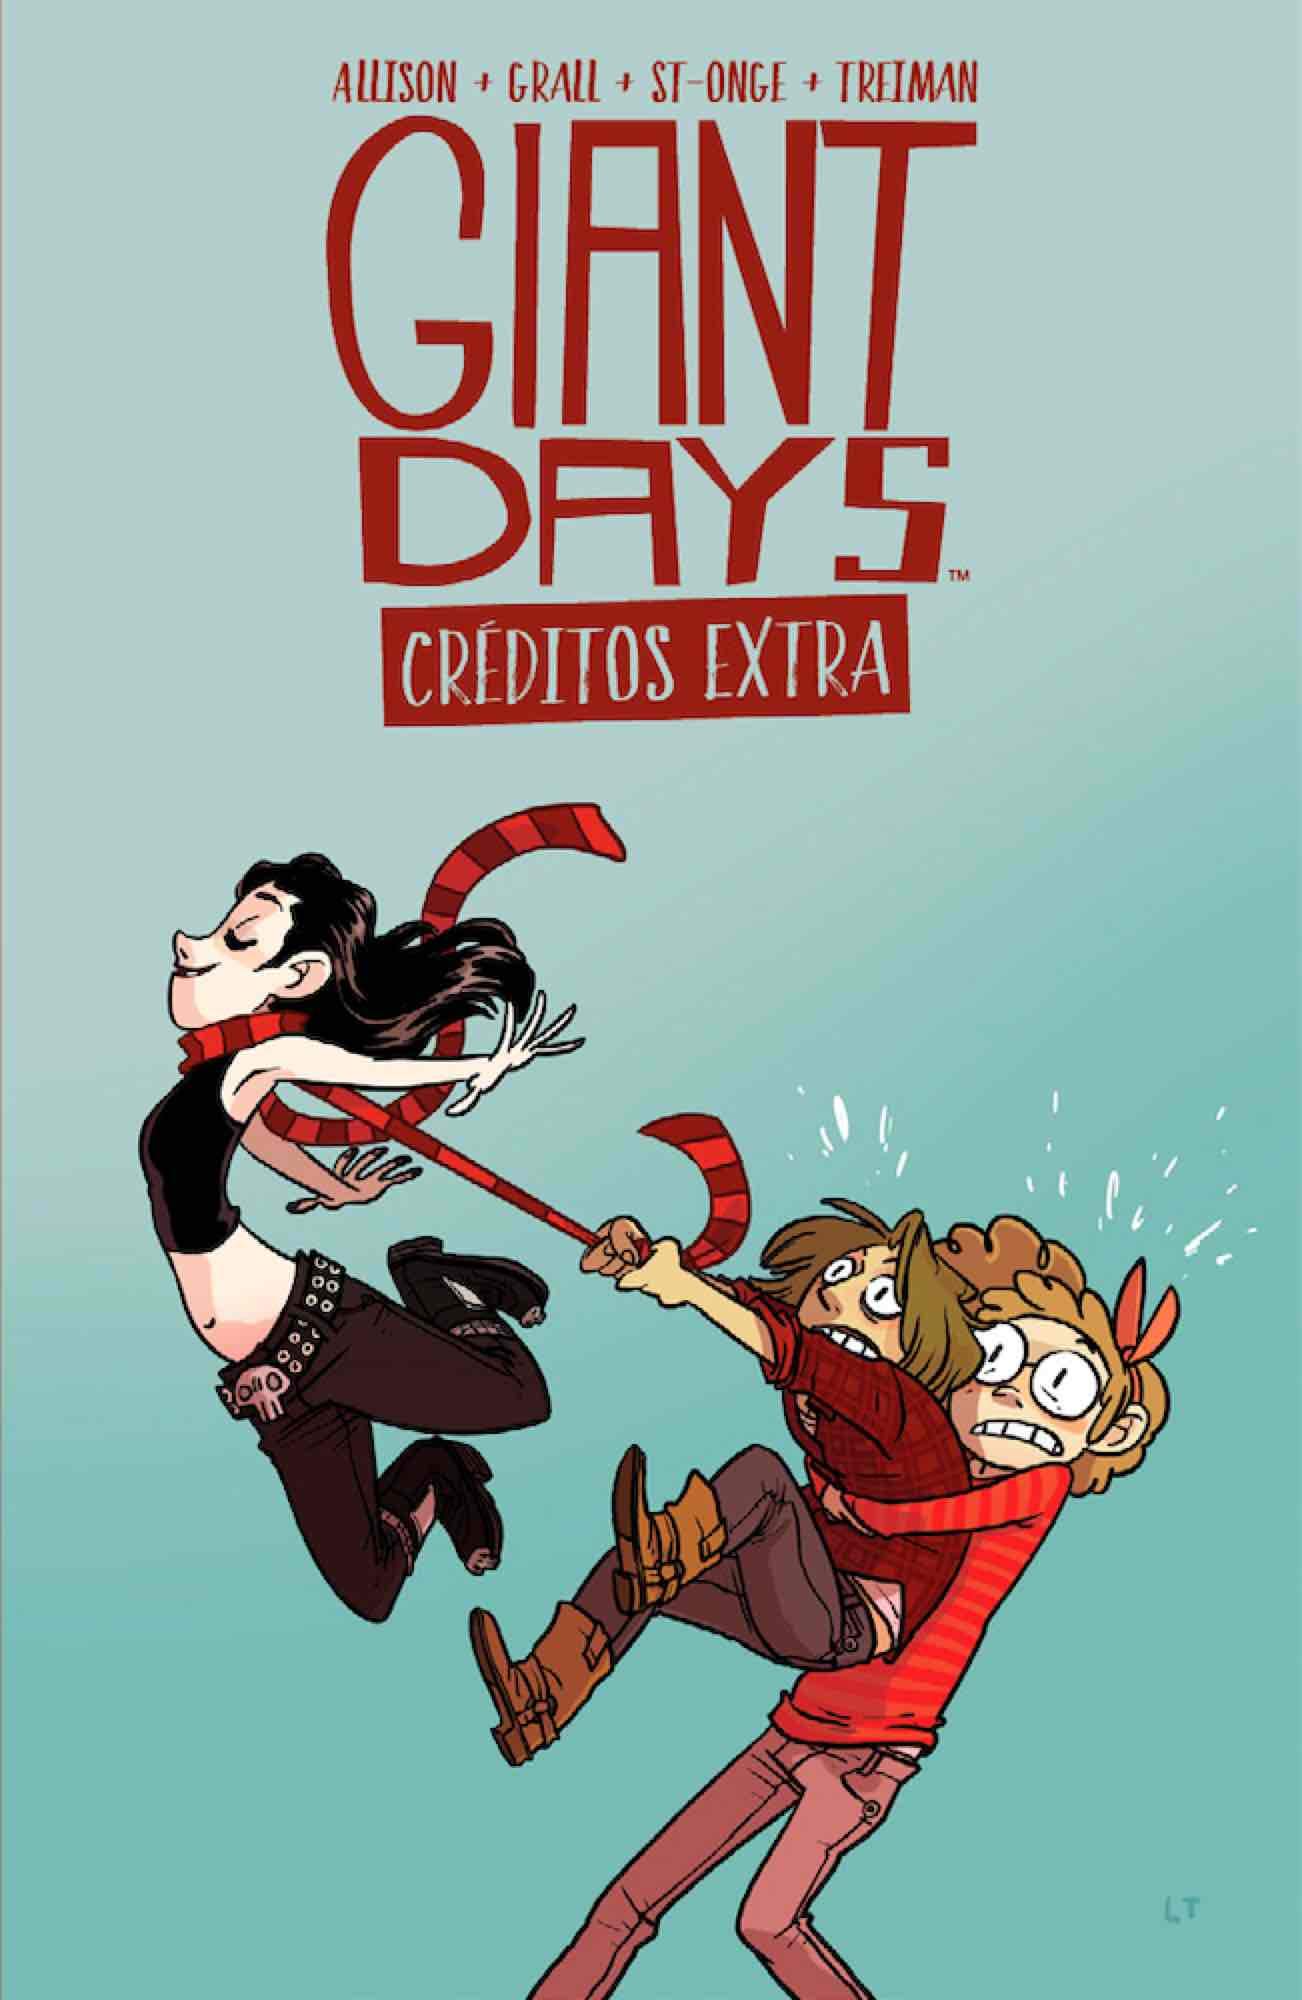 Cover from Giant Days Créditos Extra